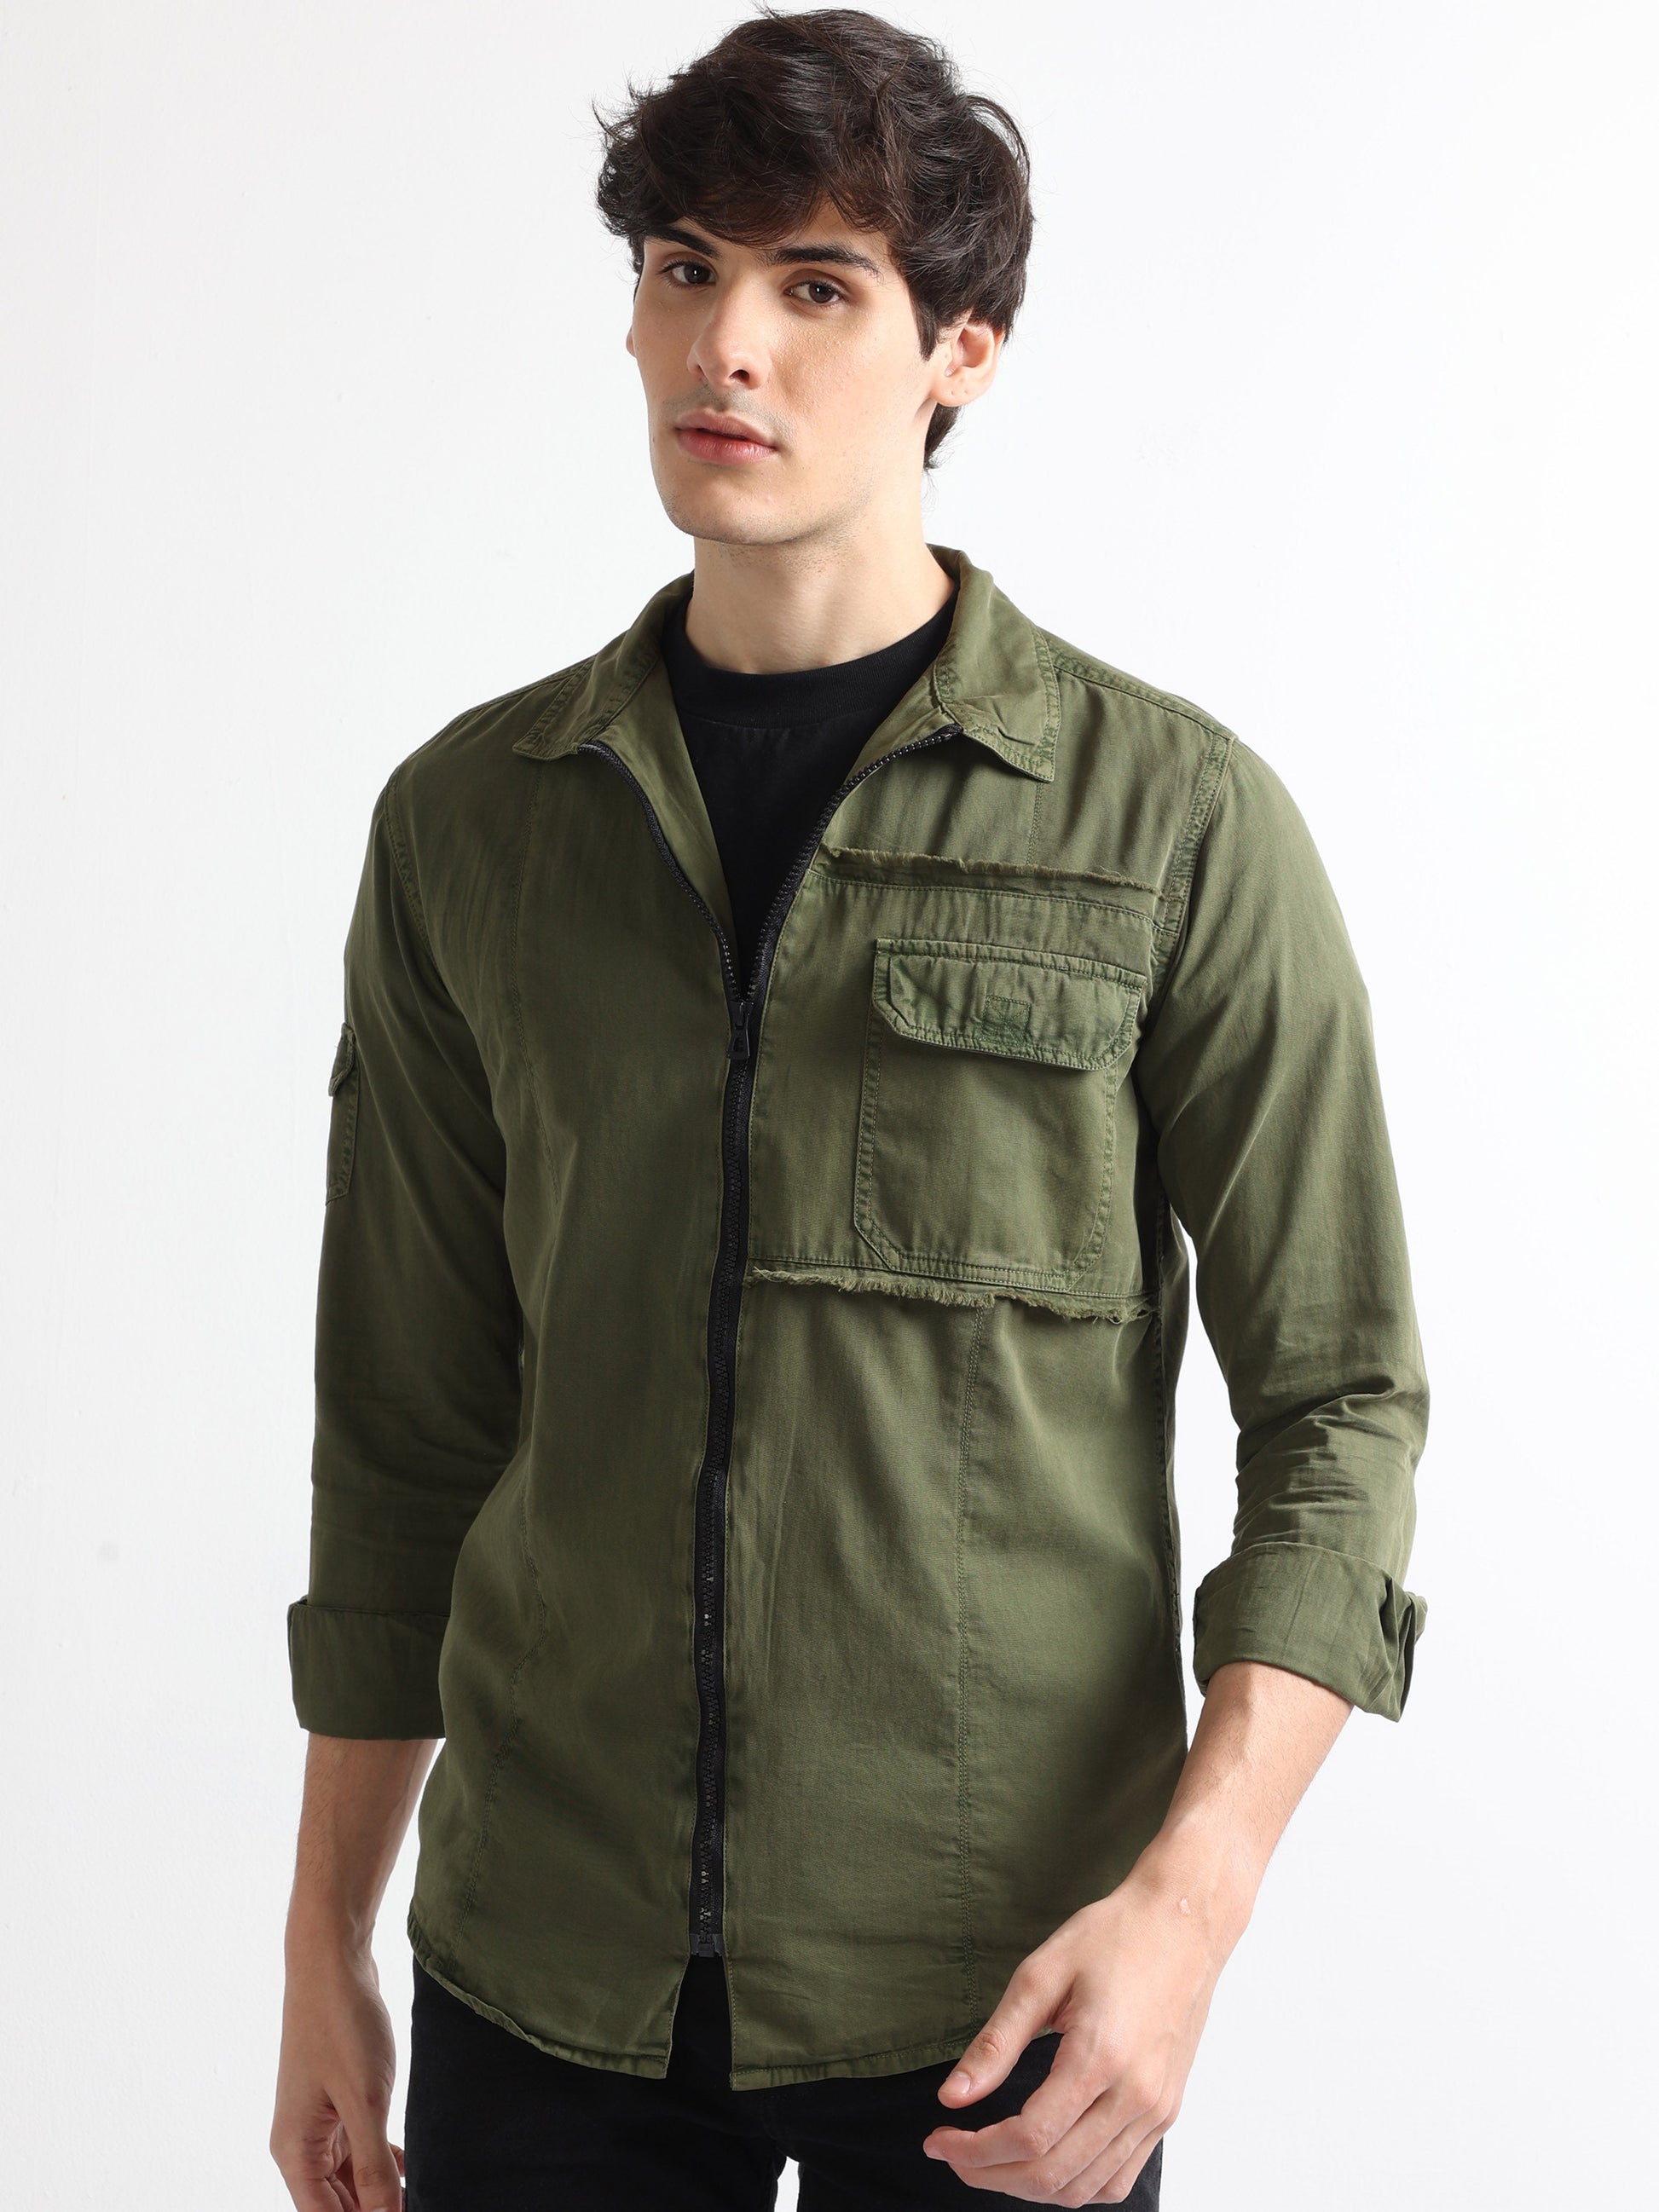 Buy Pull Over Fashionable Shirt With Sleeve Pocket Online.